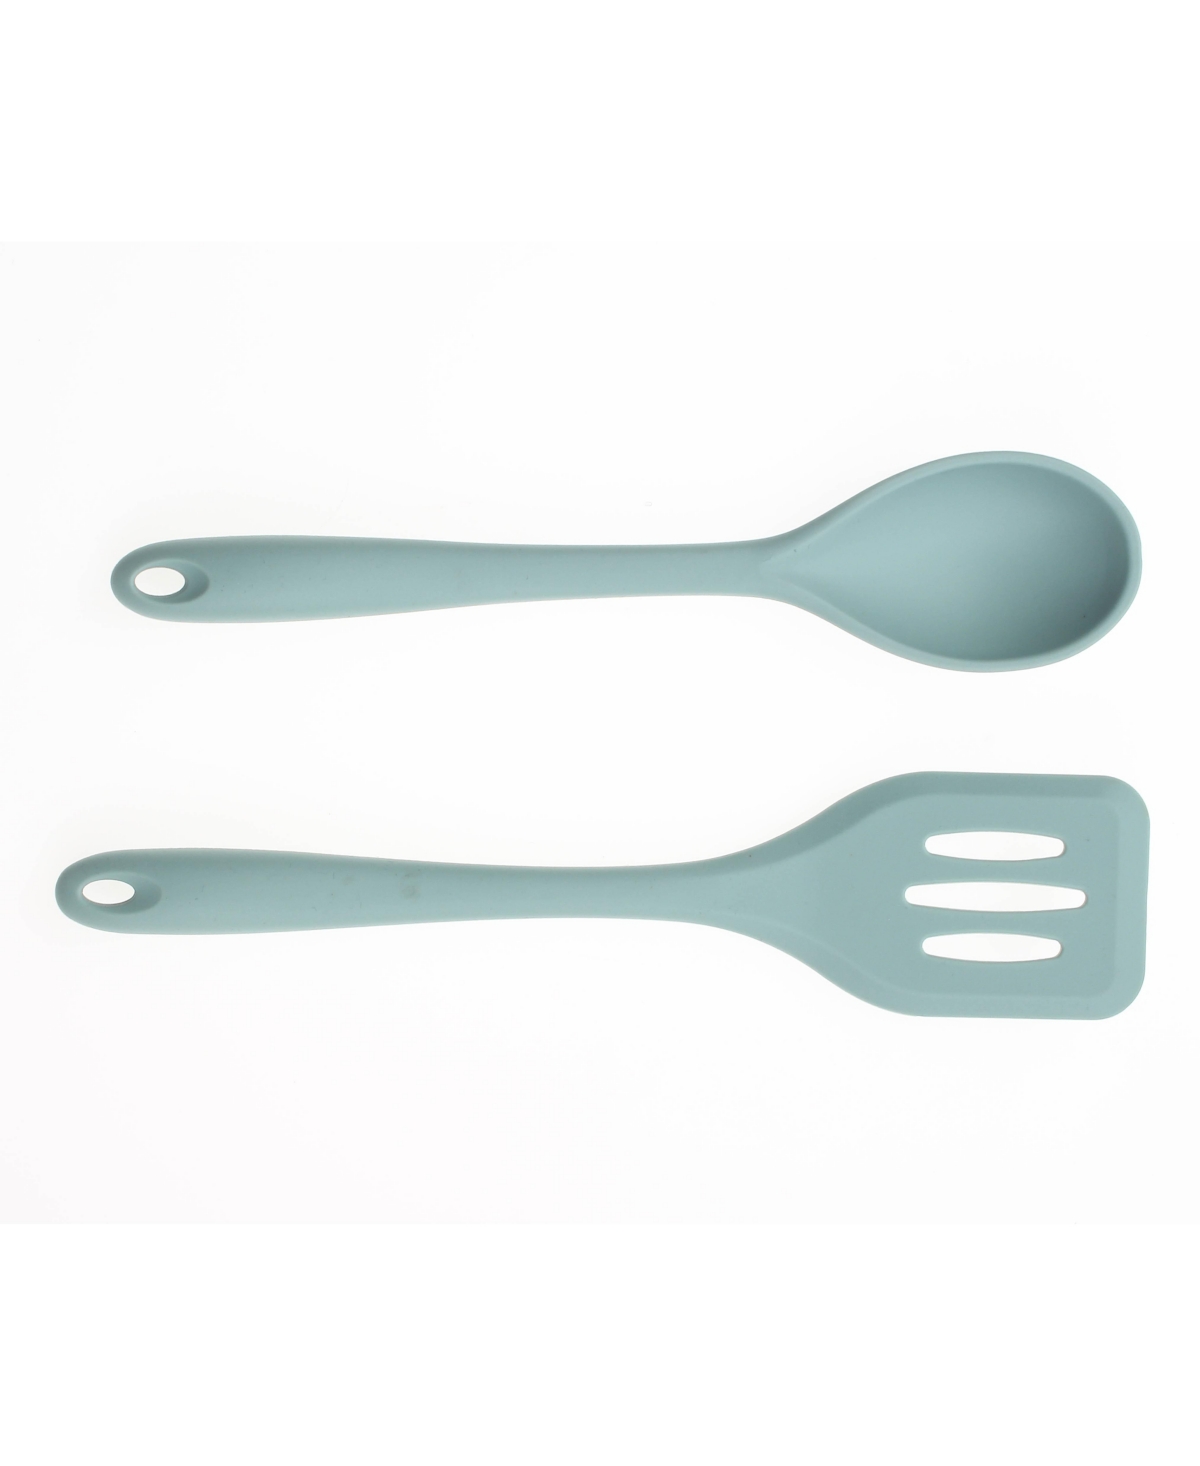 Art & Cook 2 Piece Silicone Solid Turner And Slotted Spoon Set In Prestige